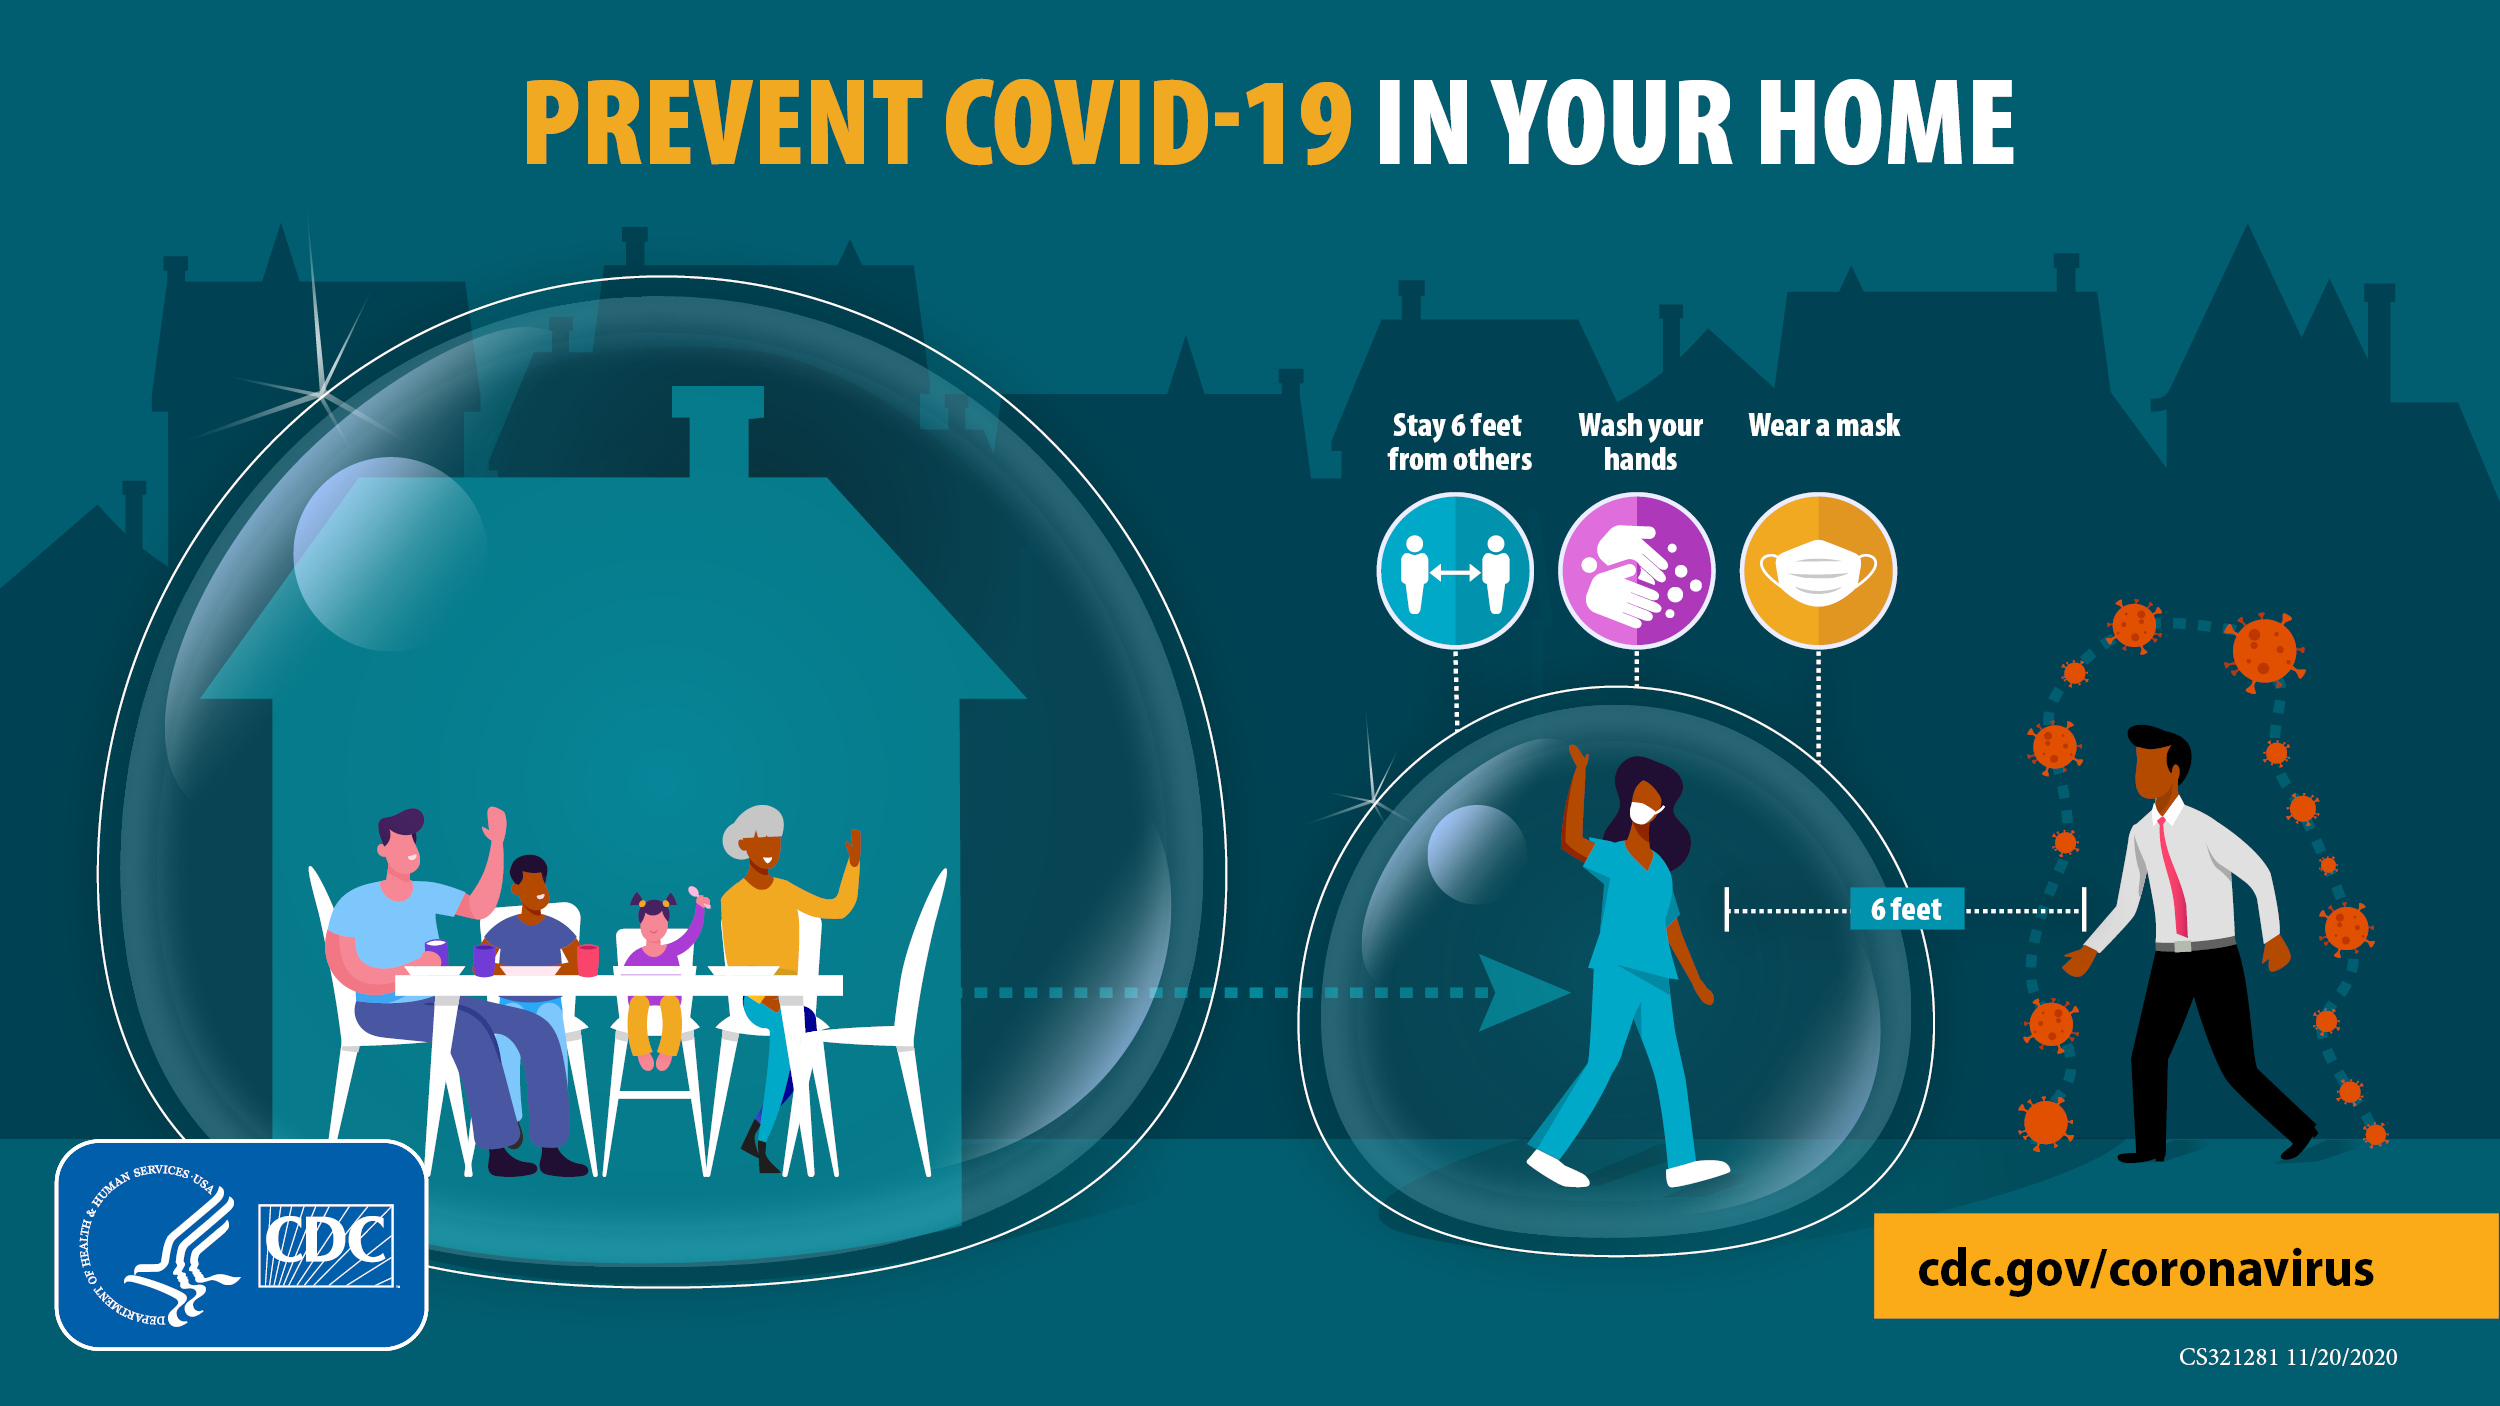 Prevent COVID-19 inside your home